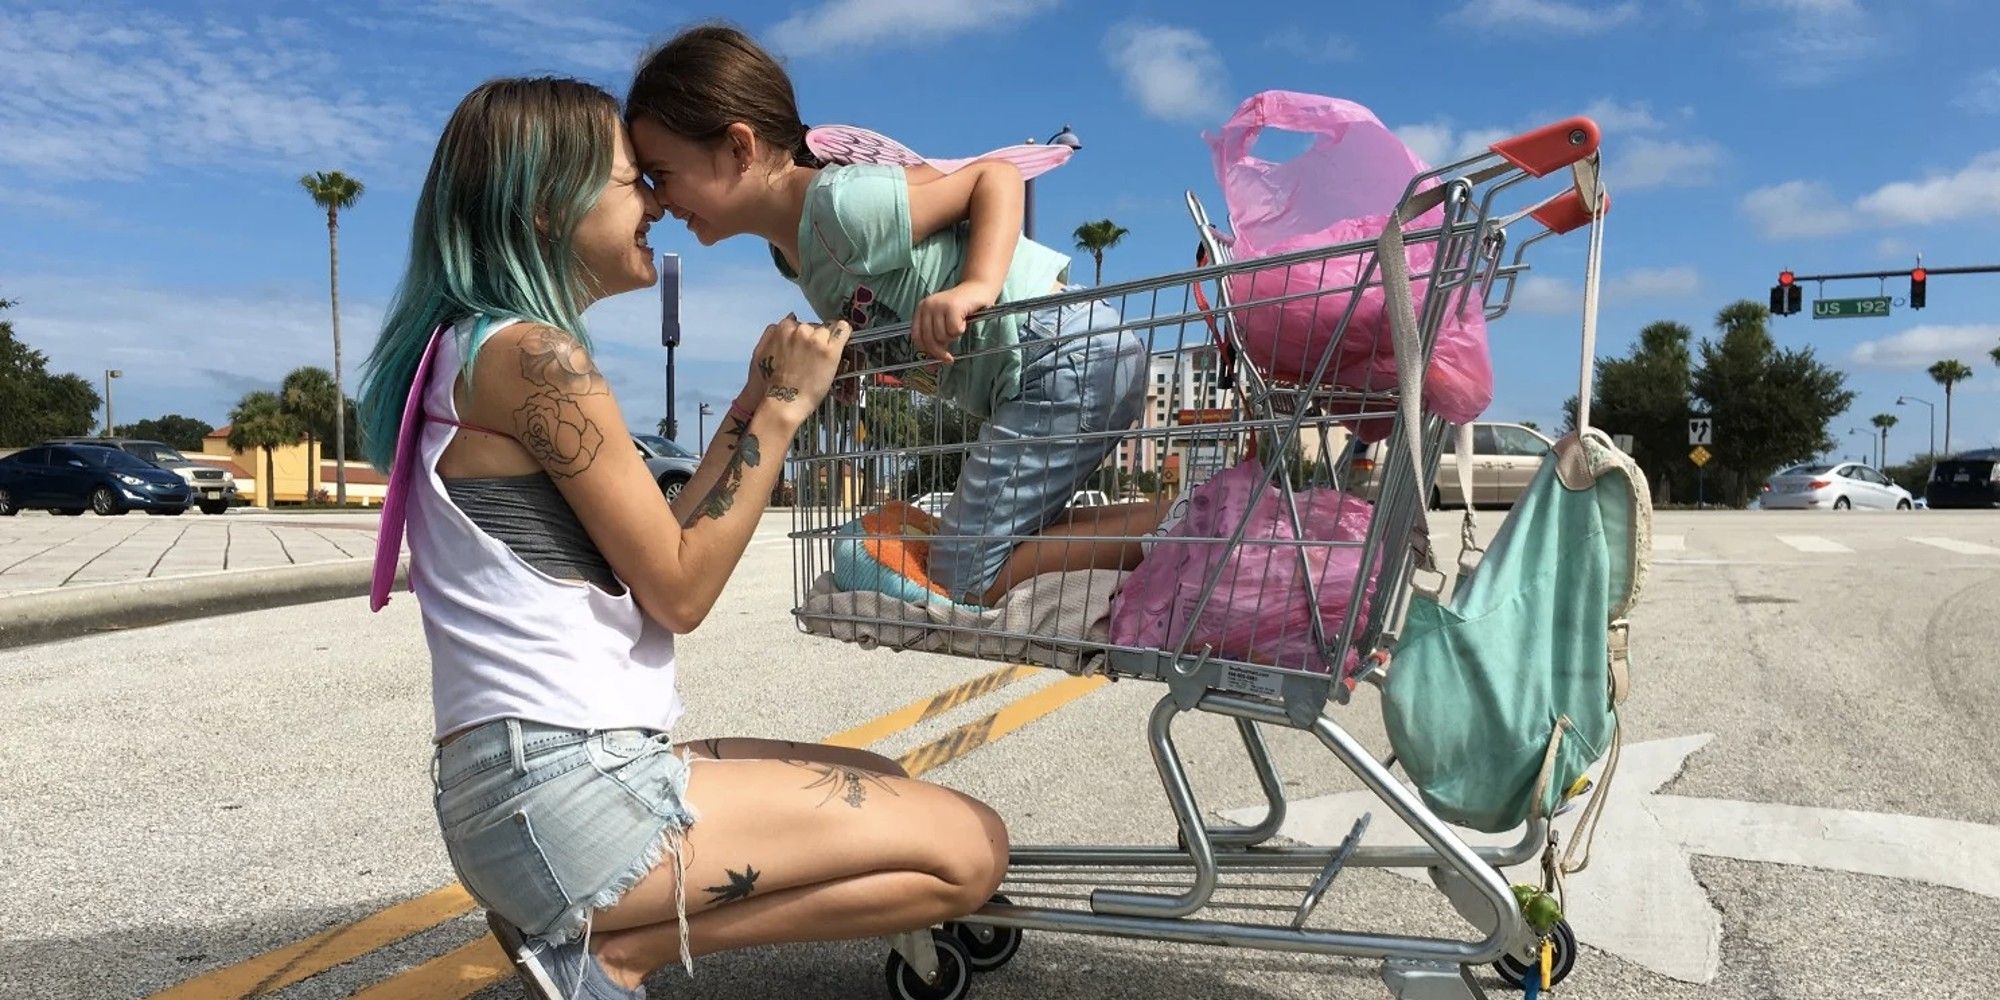 Bria Vinaite and Brooklynn Prince in 'The Florida Project'